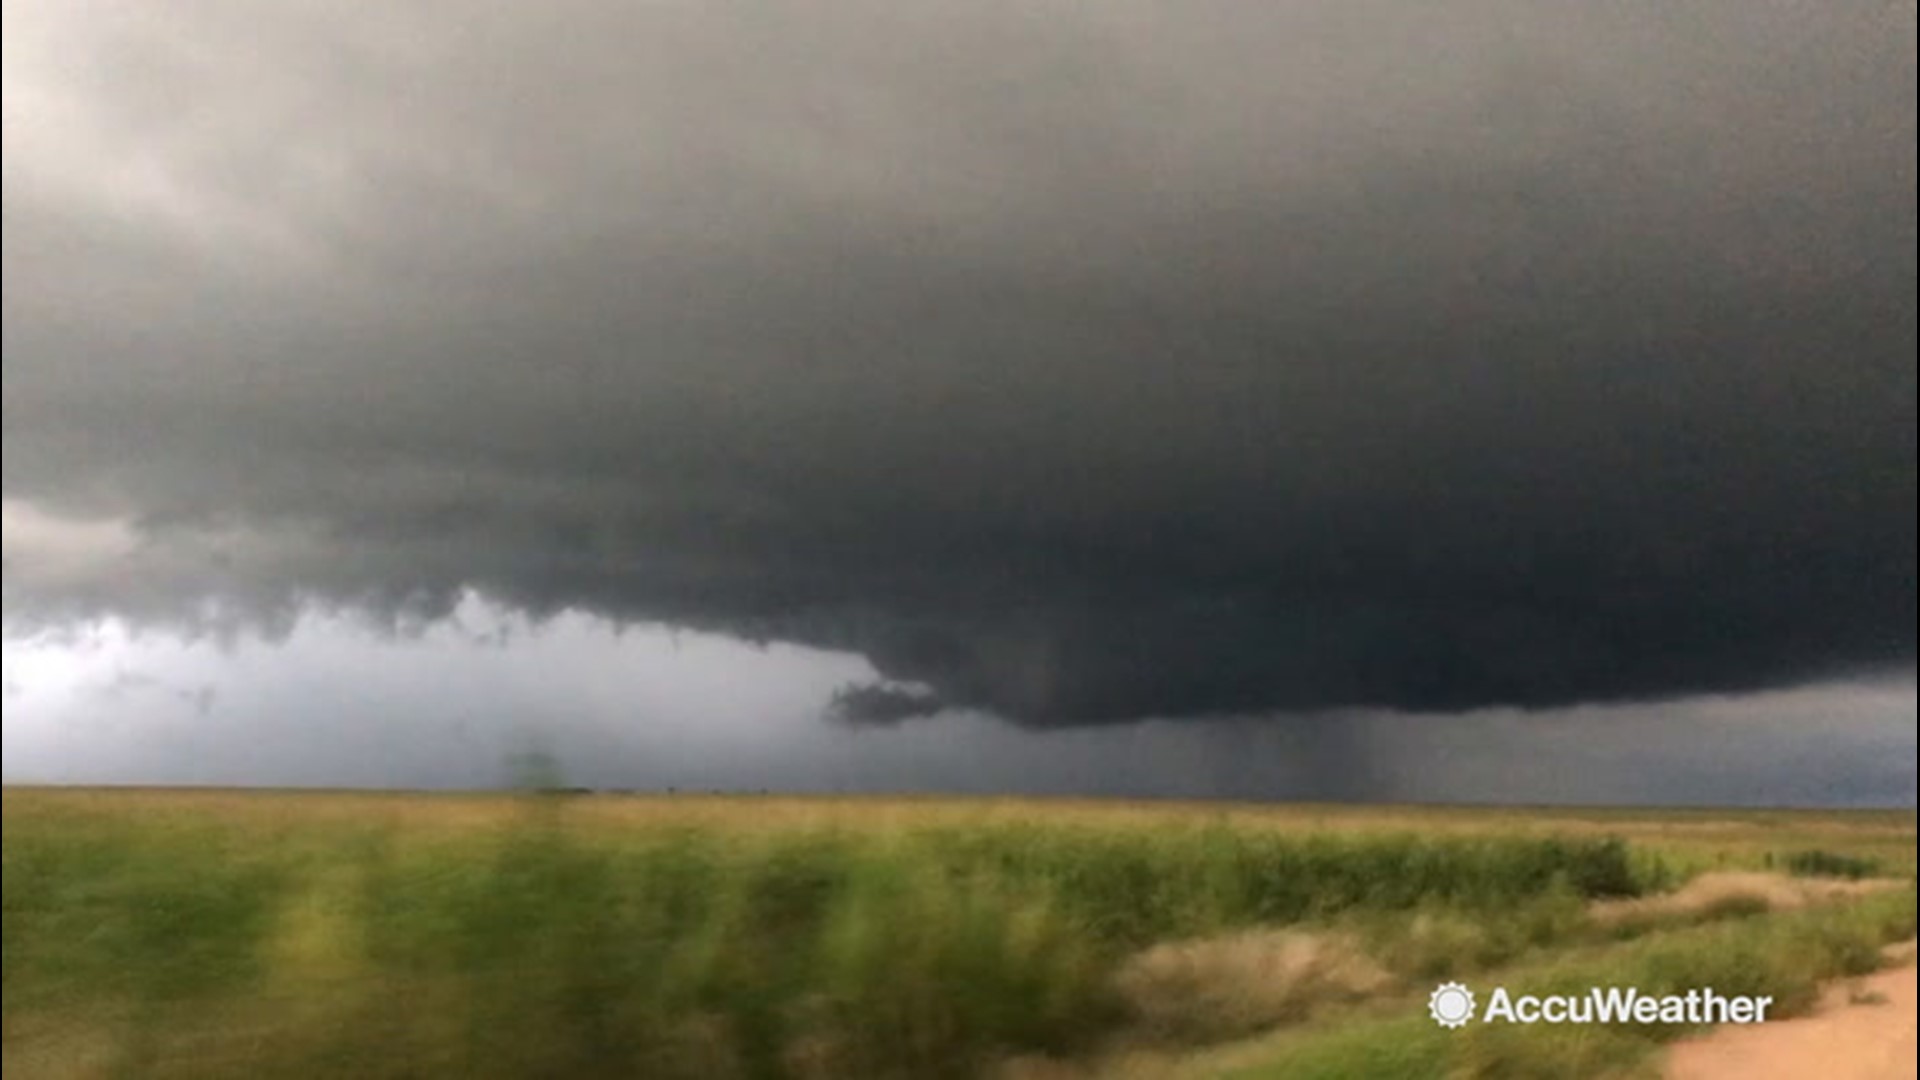 Reed Timmer, storm chaser, is back with more footage of a tornado-warned supercell in Dresden, Kansas, on Saturday, Aug. 24.